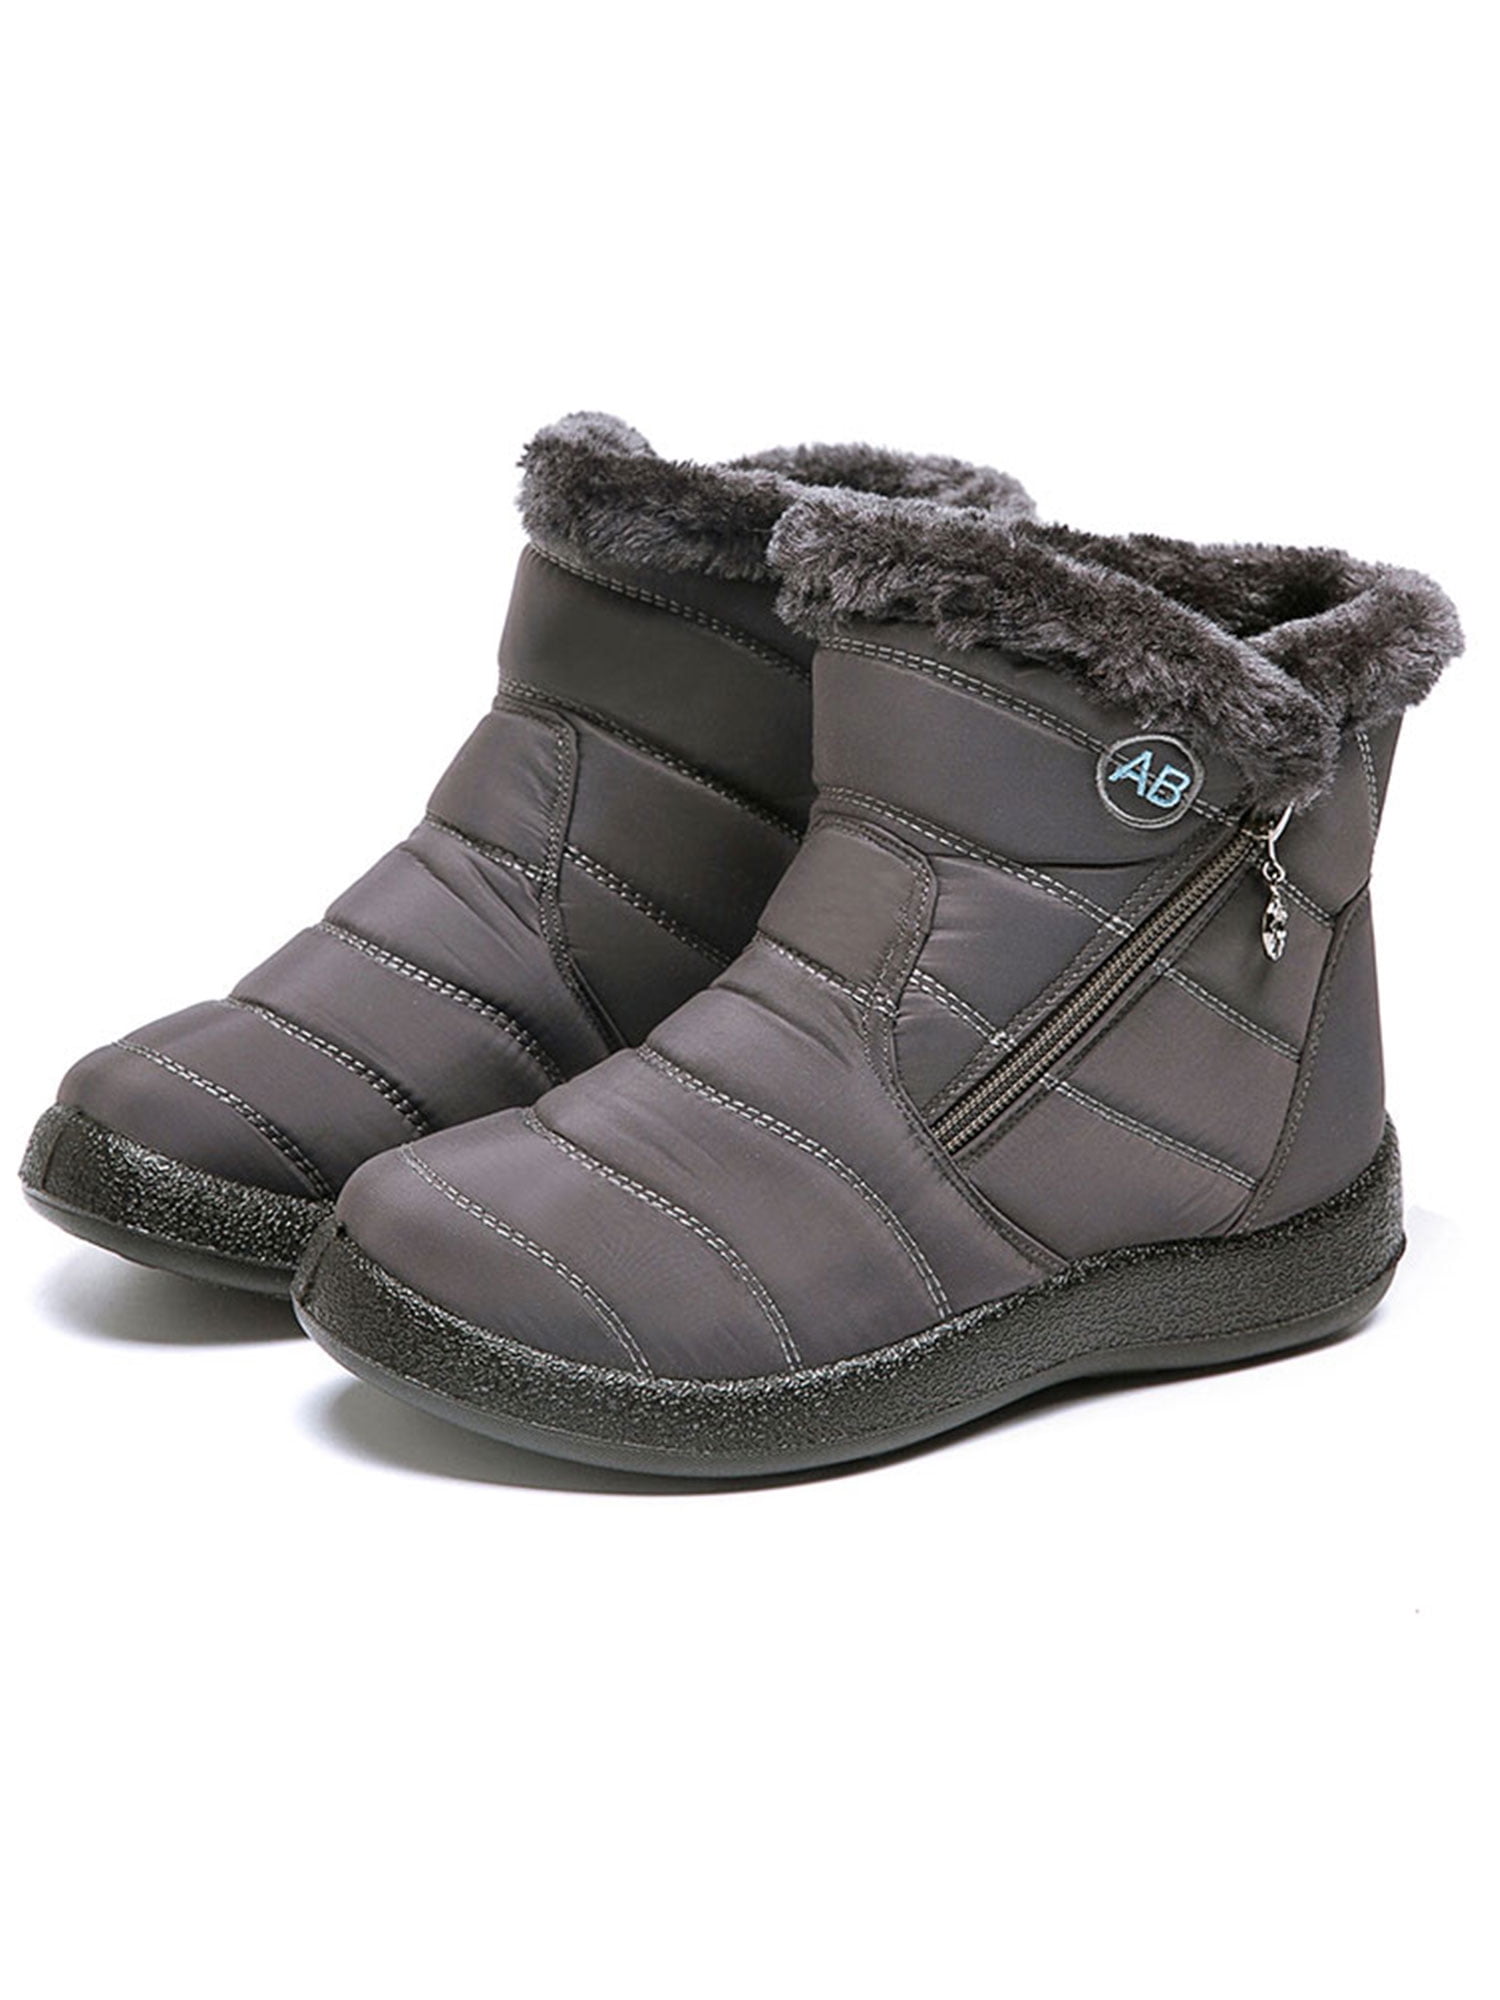 Details about   Winter Womens Waterproof Snow Boots Fur Lined Slip On Warm Ankle Shoes Outdoor 